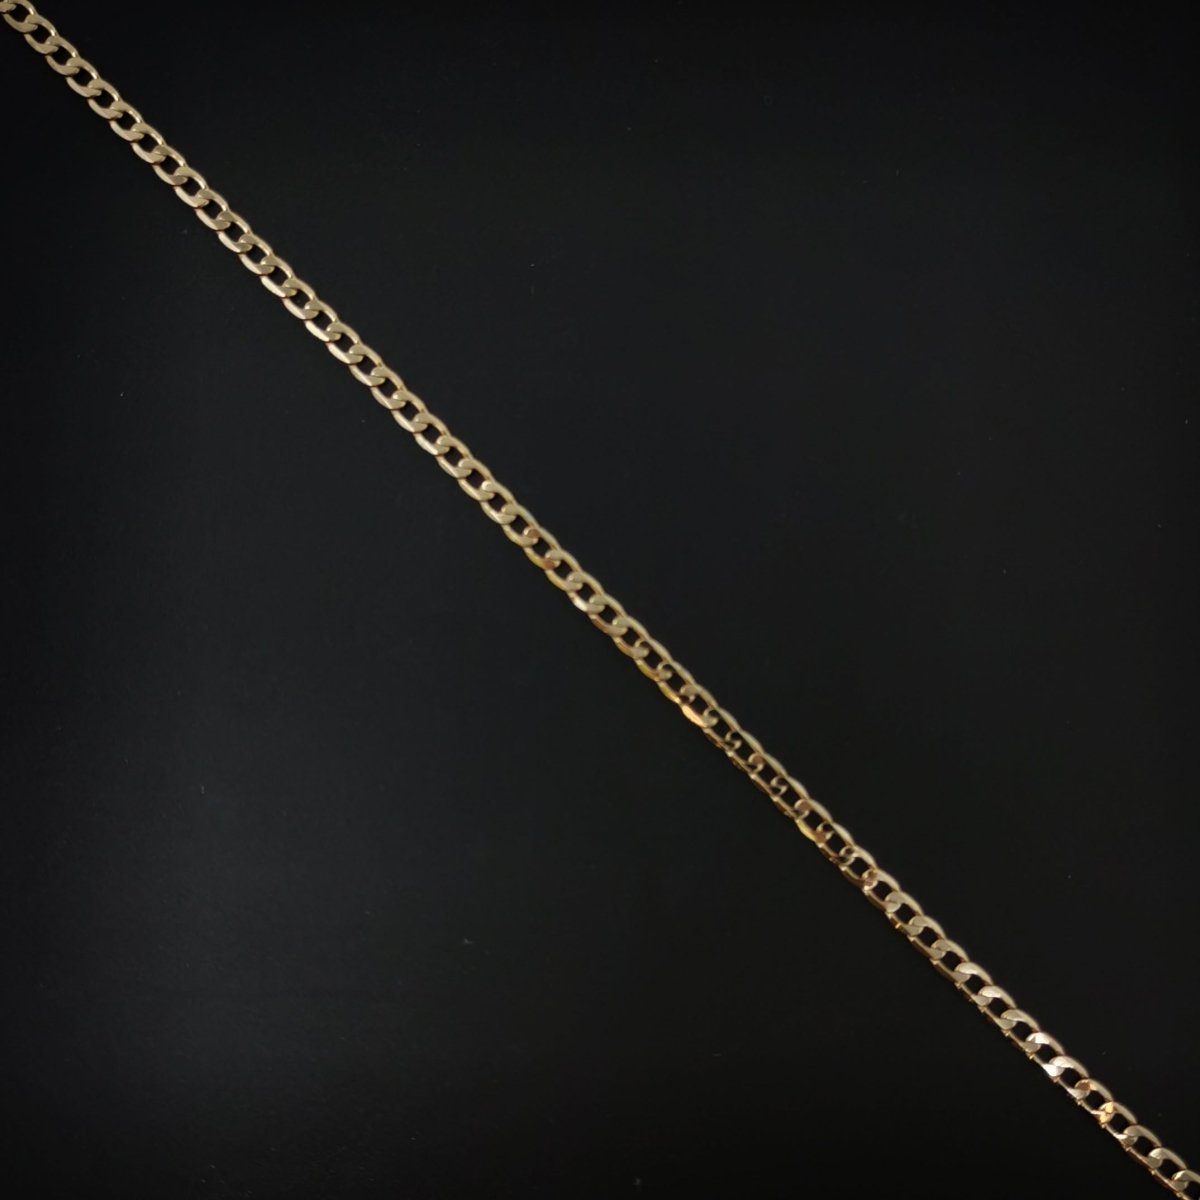 18K Gold Filled Curb Chain Necklace, 17.7 Inches Curb Finished Necklace For Jewelry Making, Dainty 1mm Curb Necklace w/ Lobster Clasps | CN-679 Clearance Pricing - DLUXCA